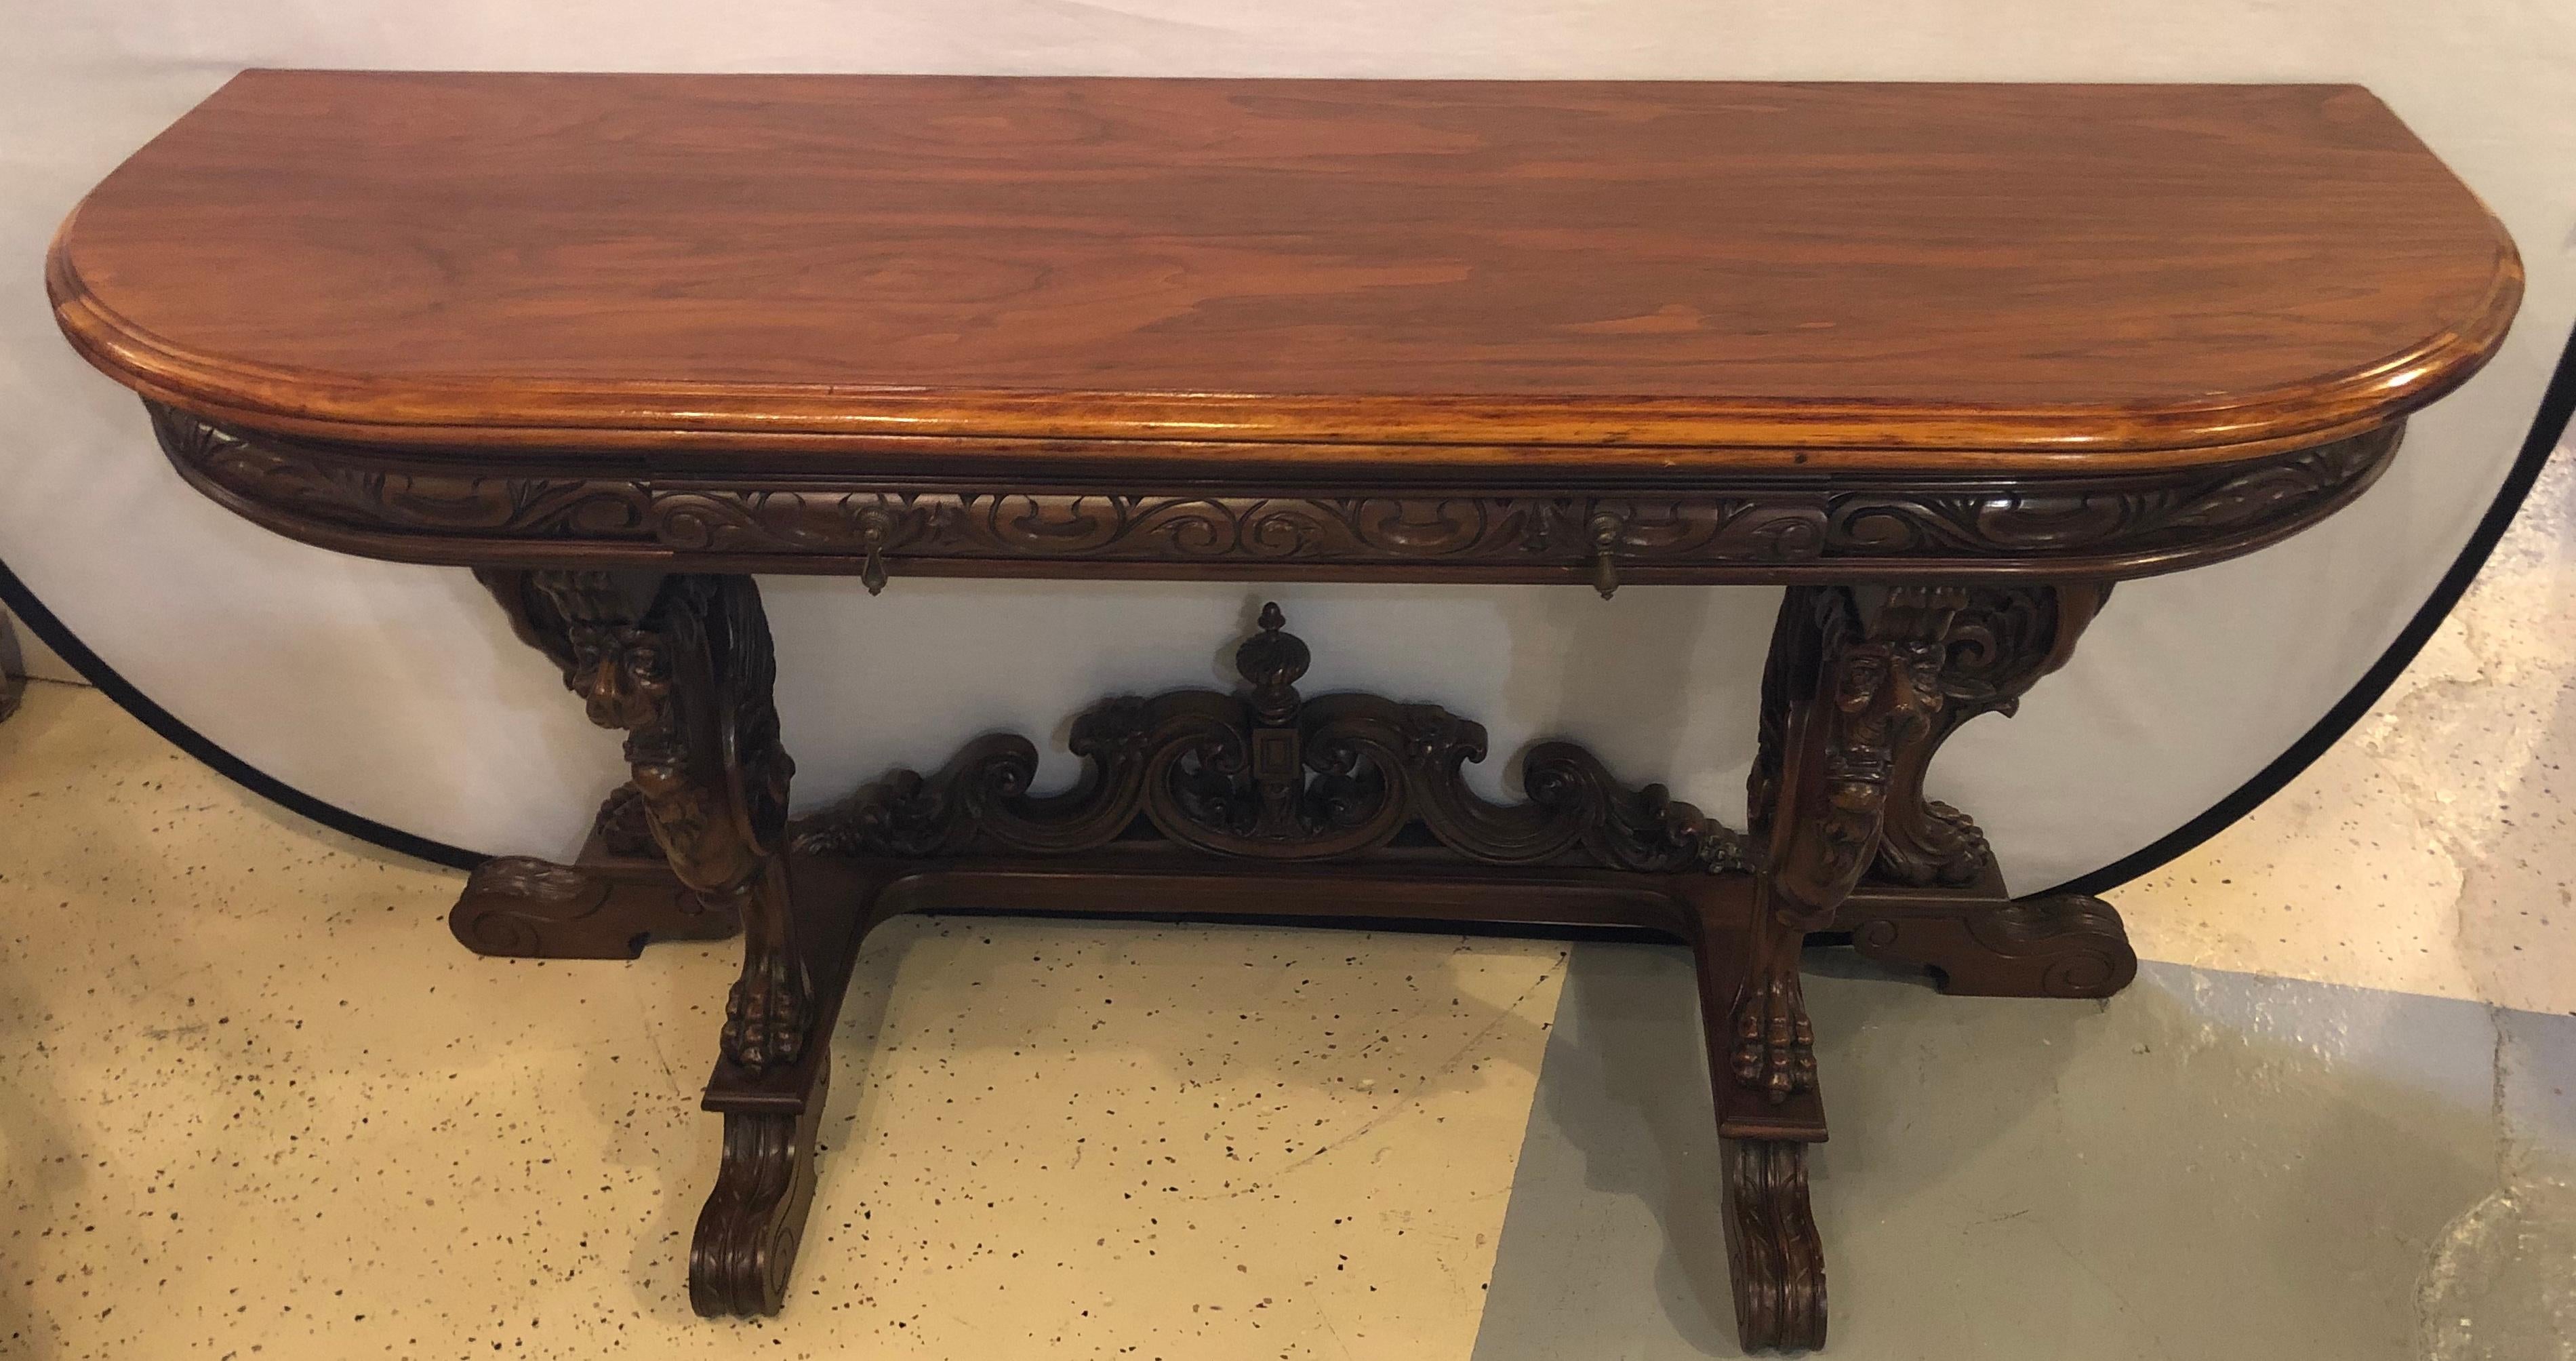 Late 19th or early 20th century Horner Brothers quality flip top dining table with 4 full bodied winged griffins. This wonderfully carved library or dining table sits up against any small wall and then magically flips open to seat eight or ten for